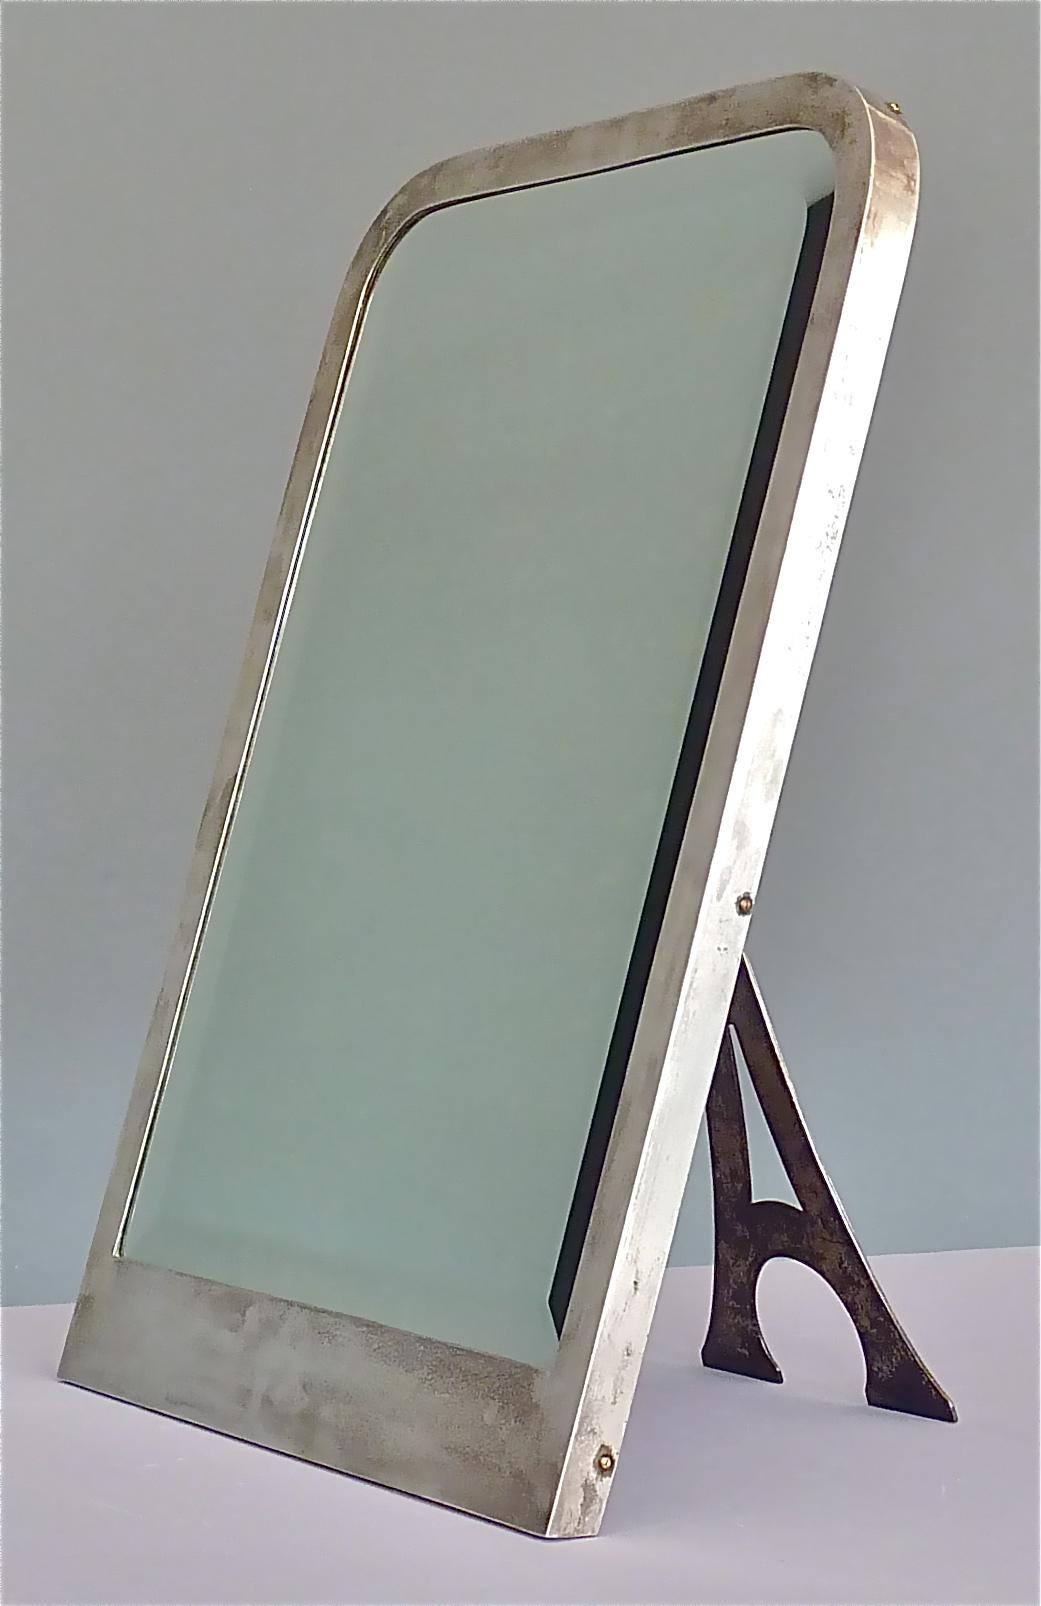 Large signed Arthur Krupp Berndorf table mirror, Jugendstil Art Nouveau, Germany circa 1905-1915. The mirror is made of silvered brass, original beveled faceted mirror glass and wood. Beautiful detail on reverse with an Eifel tower shape mirror